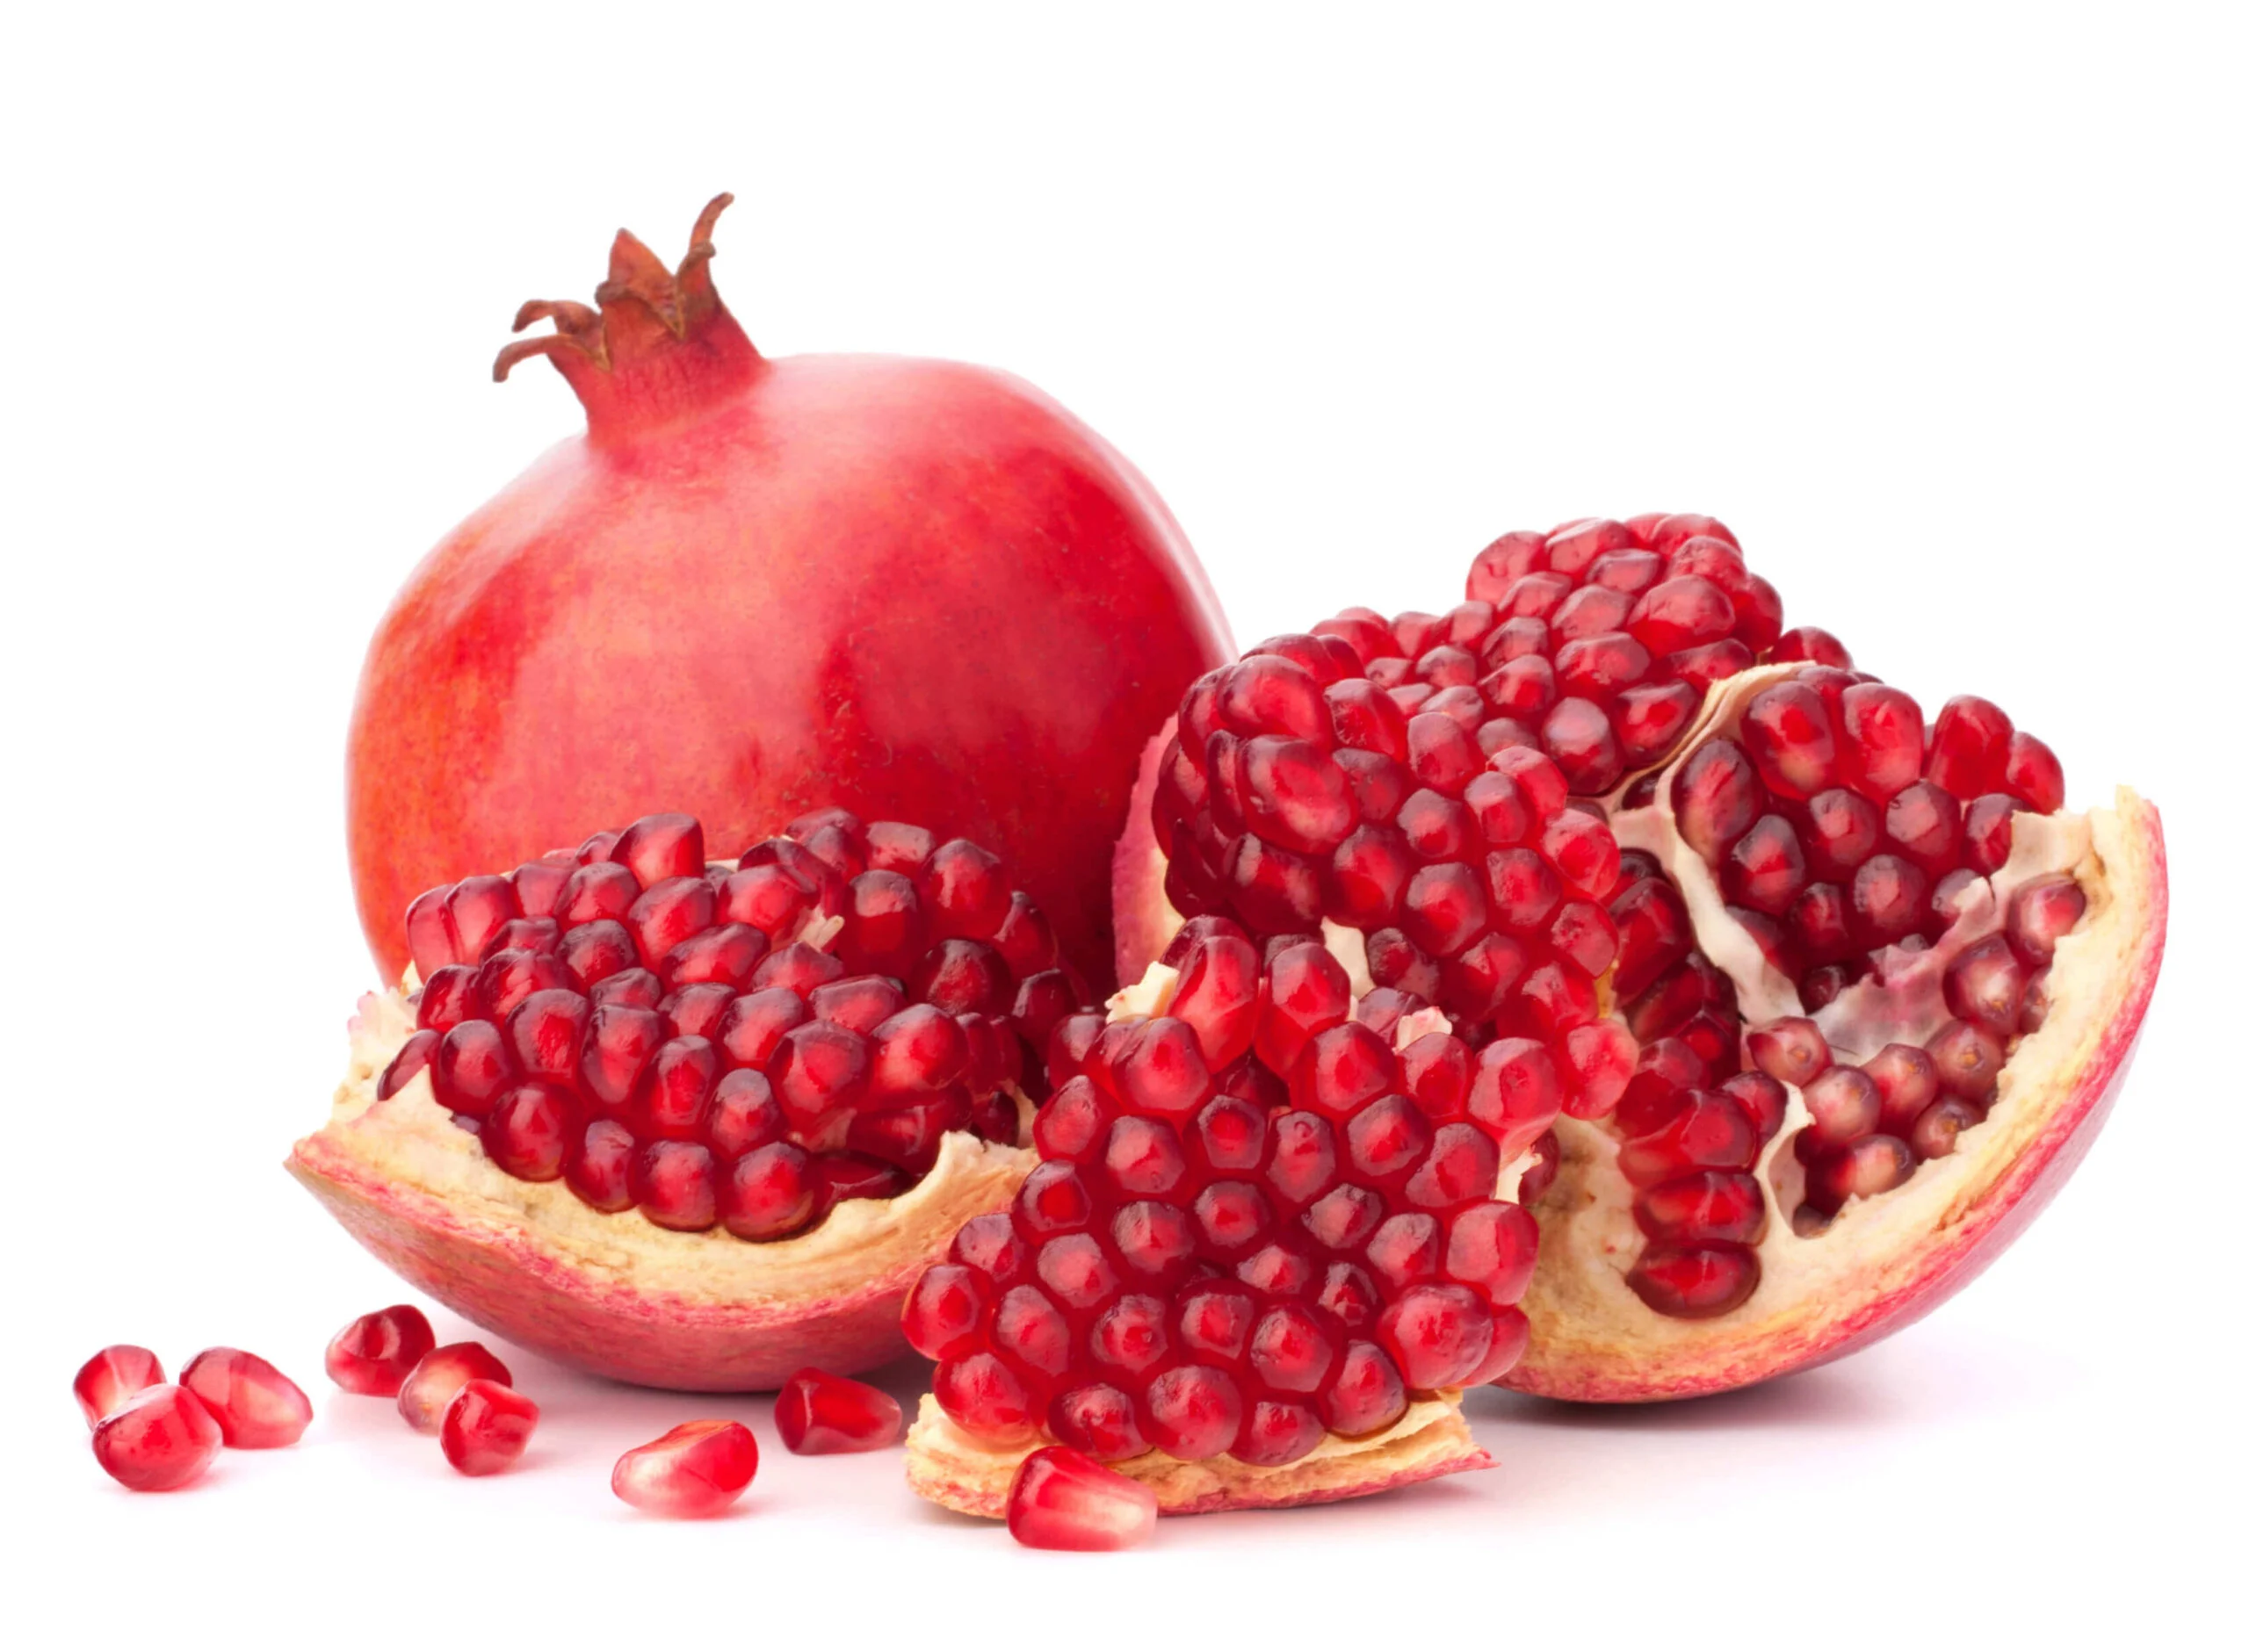 How Many Seeds Does A Pomegranate Have